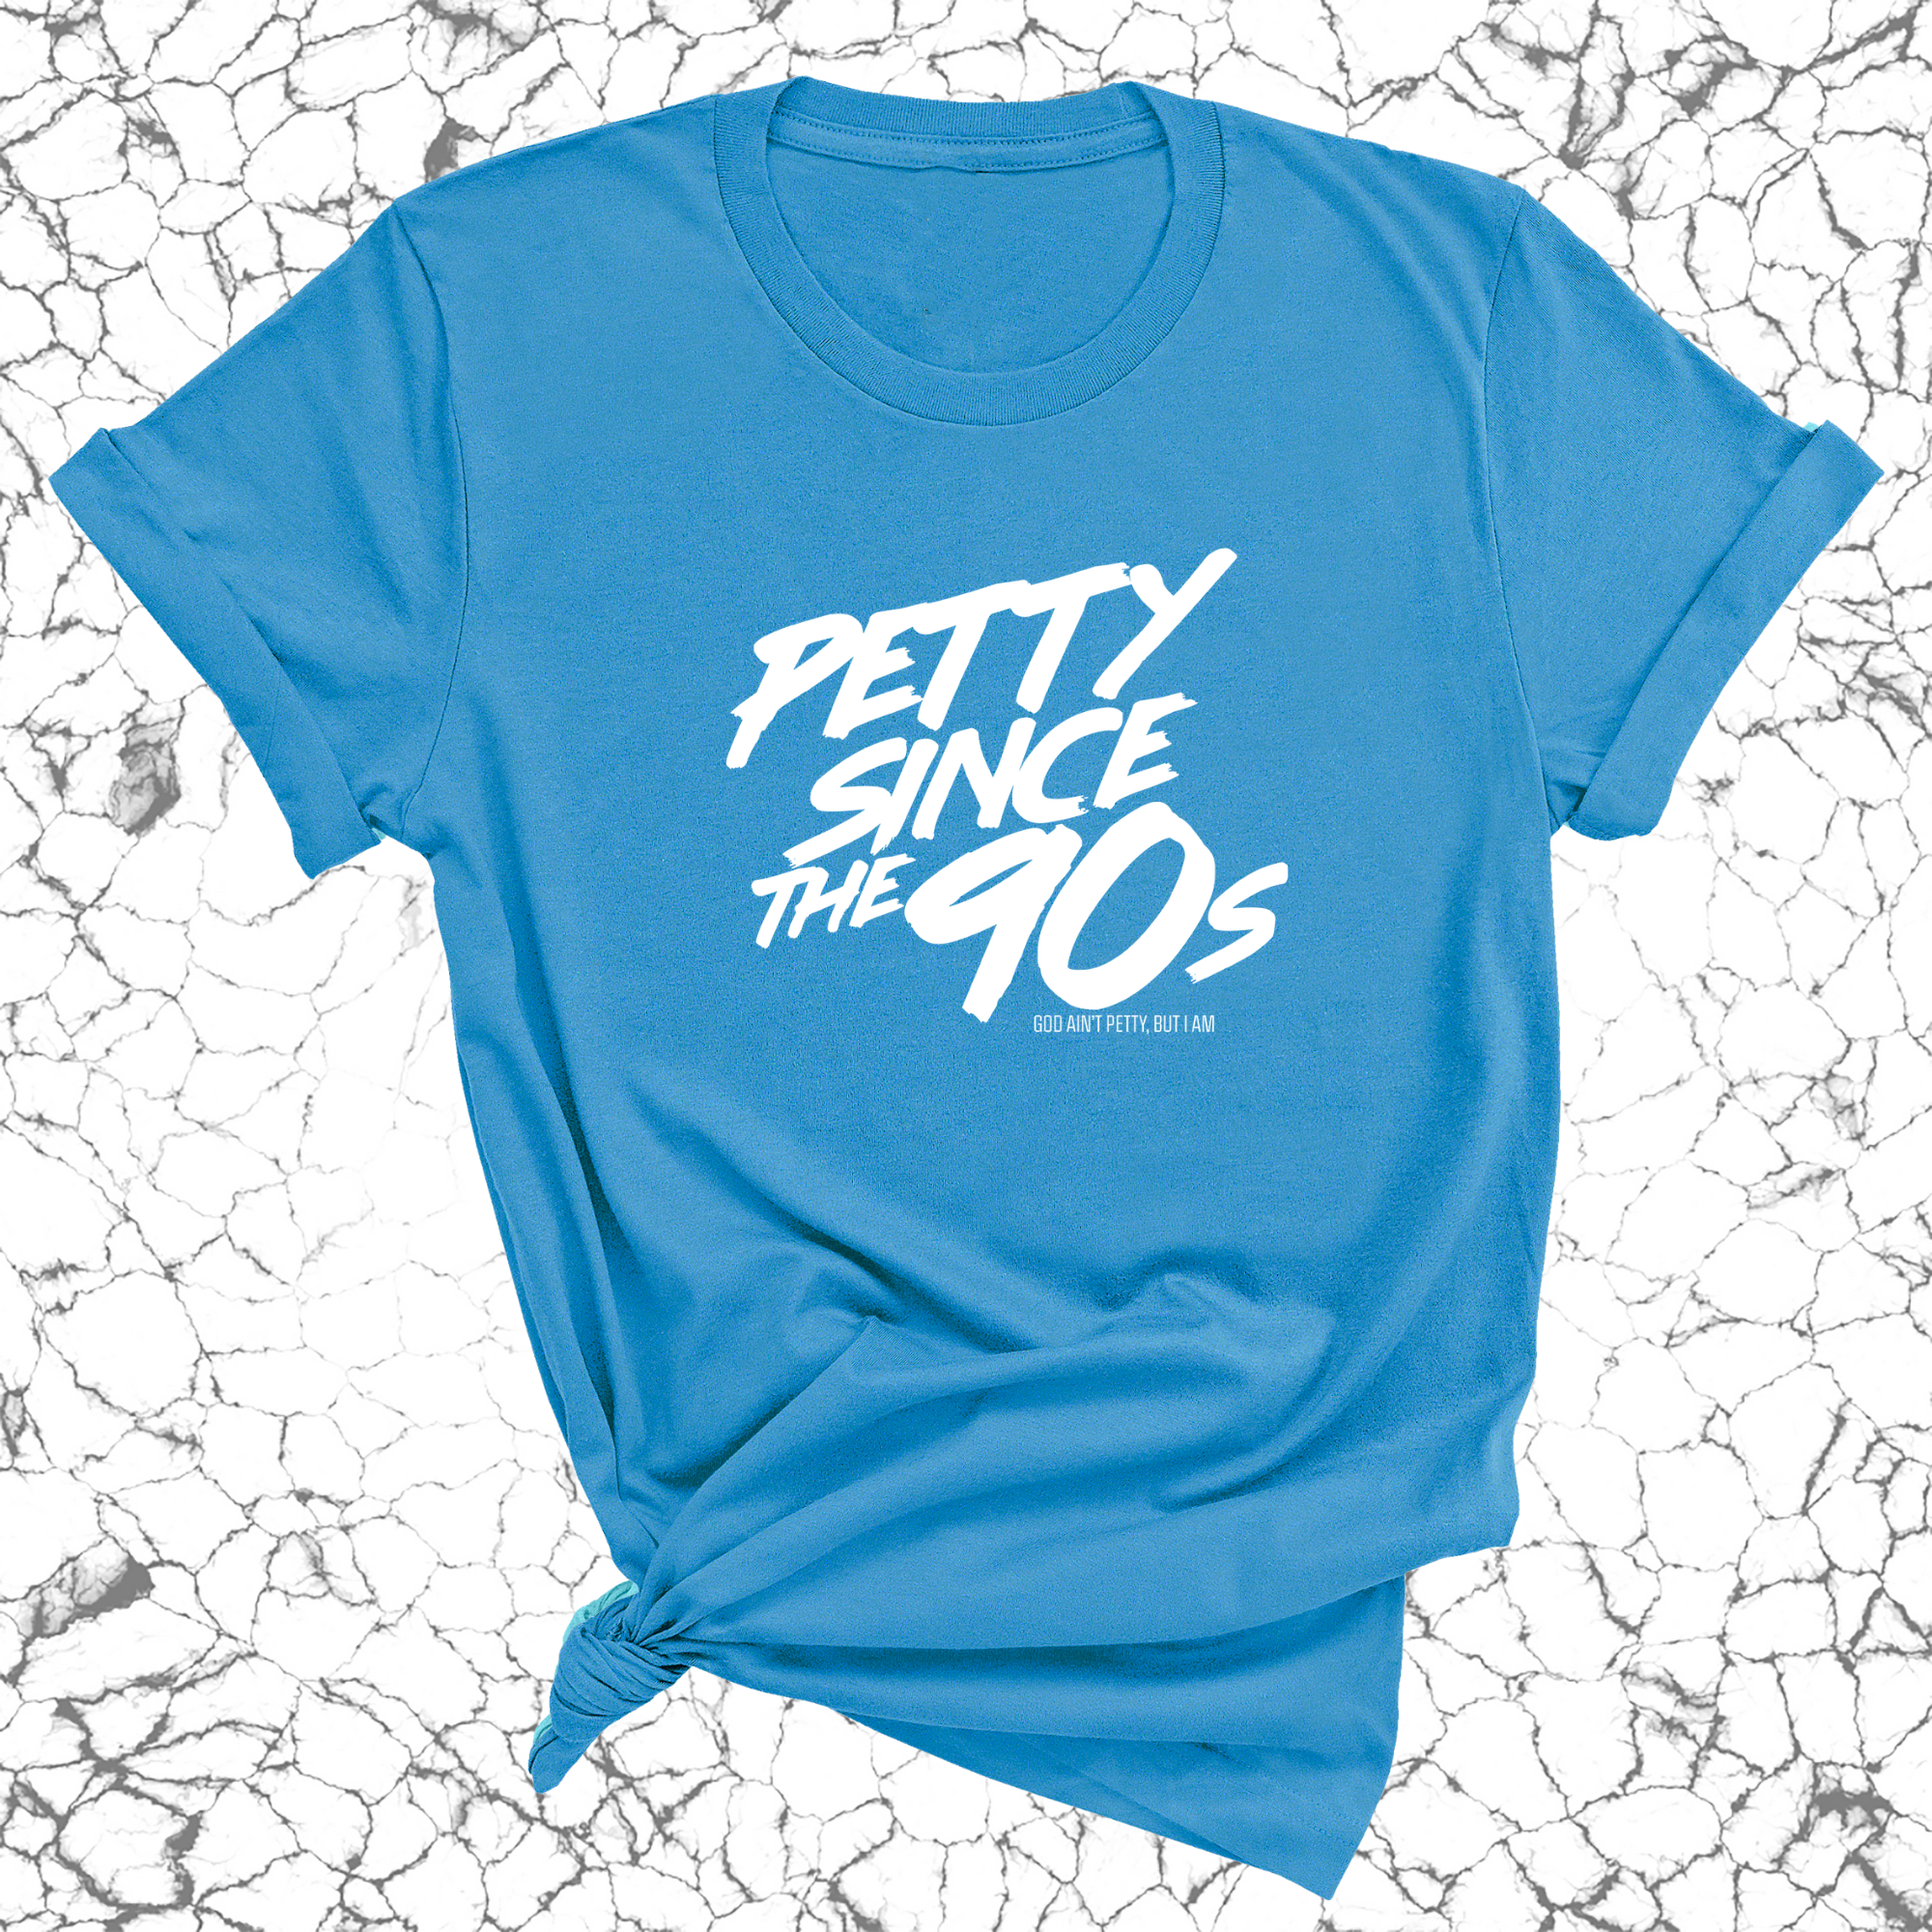 Petty Since the 90s Unisex Tee-T-Shirt-The Original God Ain't Petty But I Am